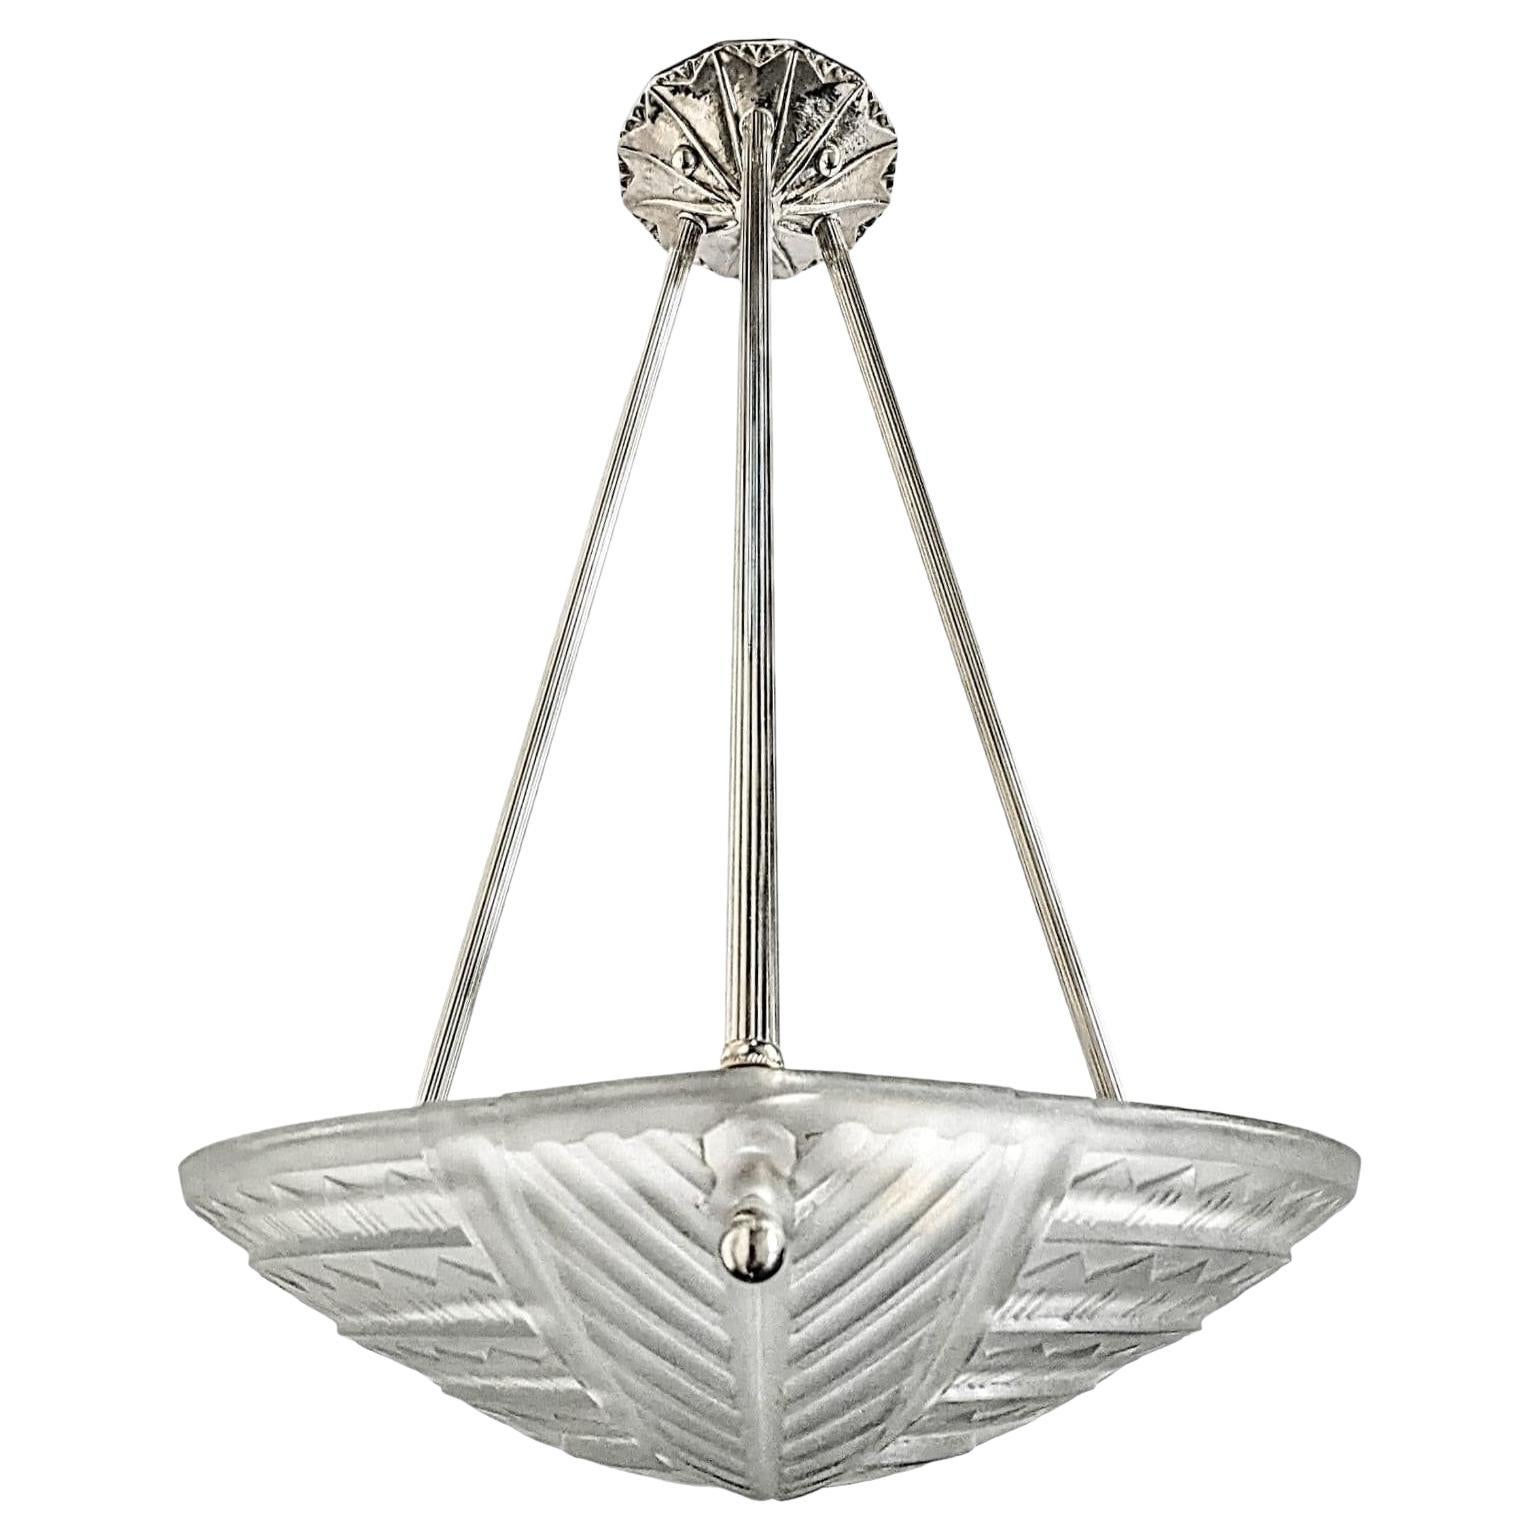 A French Art Deco pendant chandelier by the French artist “Noverdy“ in good condition. Clear frosted molded glass shade with intricate geometric polished motif details is held by three ribbed rods with a matching canopy. The fixture has been